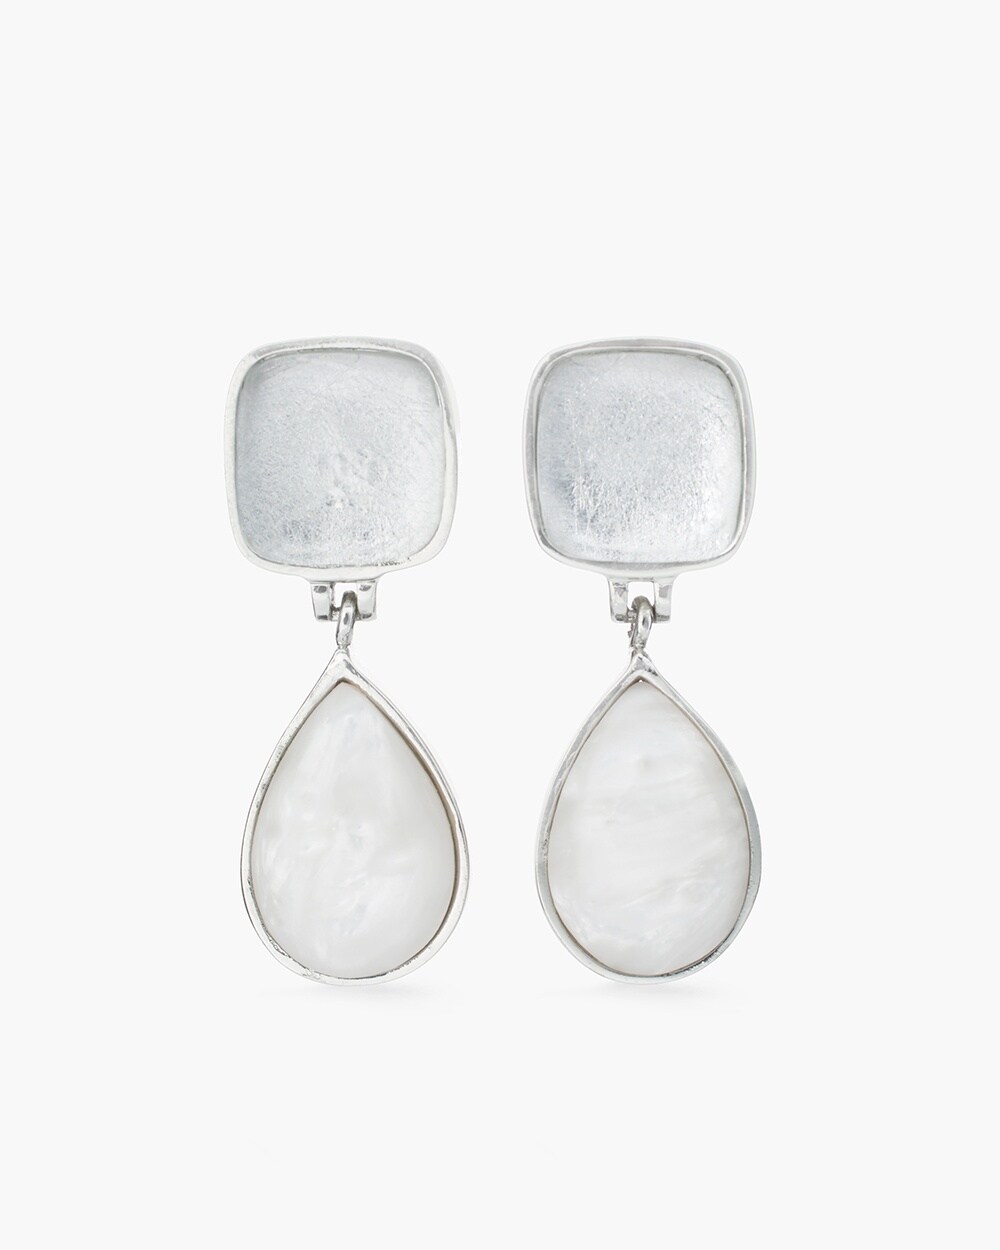 White and Silver-Tone Drop Earrings